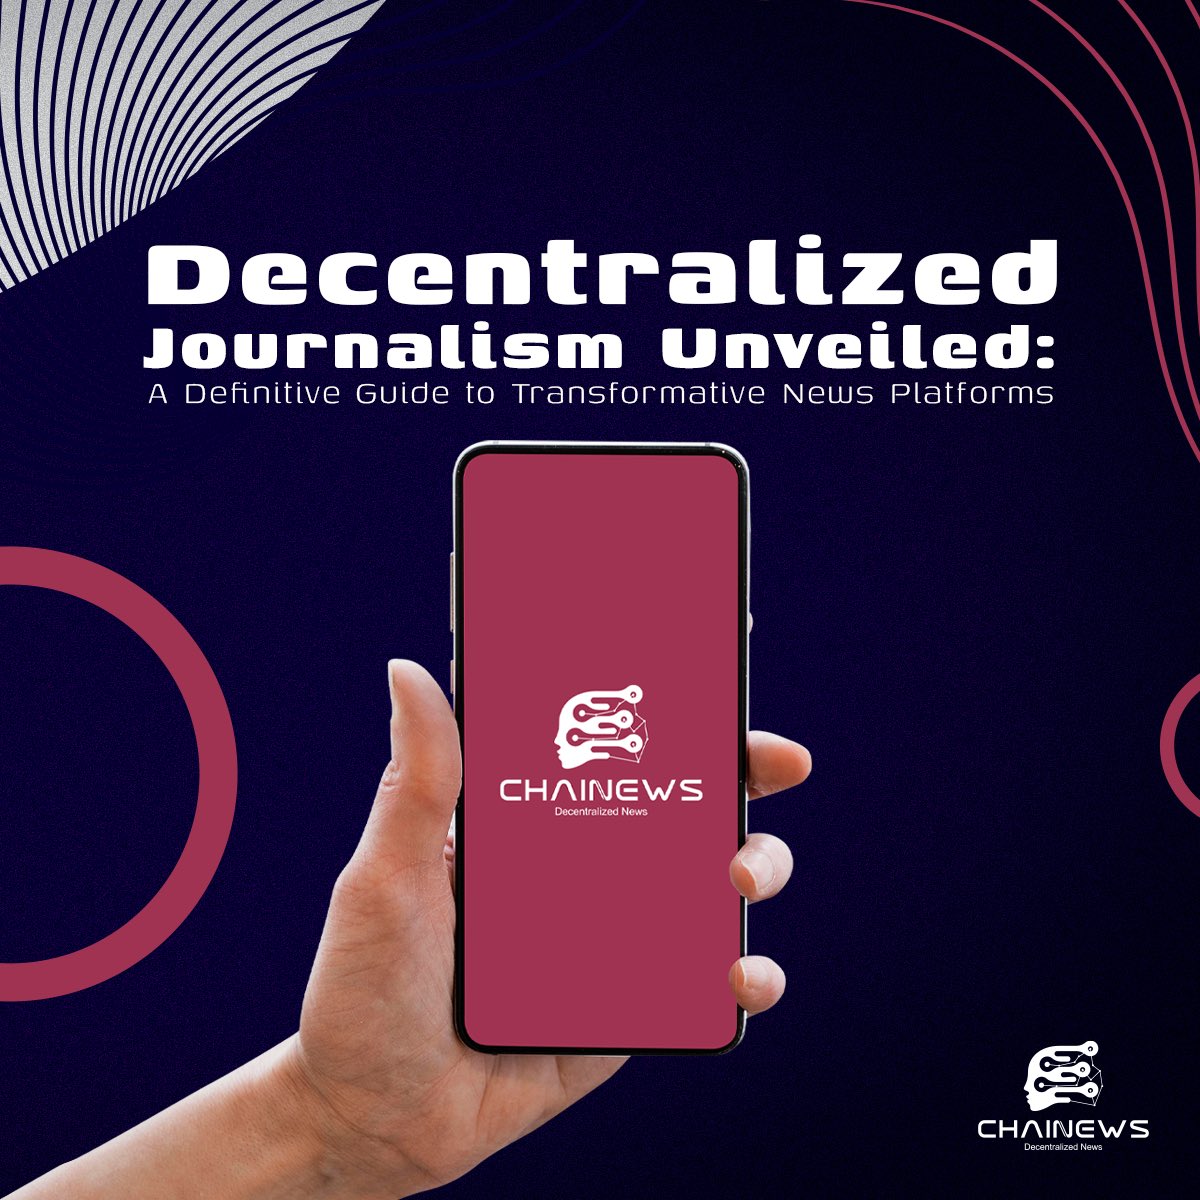 Chainews blog page is online! Decentralized Journalism Unveiled: A Definitive Guide to Transformative News Platforms. You can visit our website to read. 🌐 chainews.org #blockchain #blockchaintechnology #blockchainnews #blockchains #blockchainrevolution #chainews